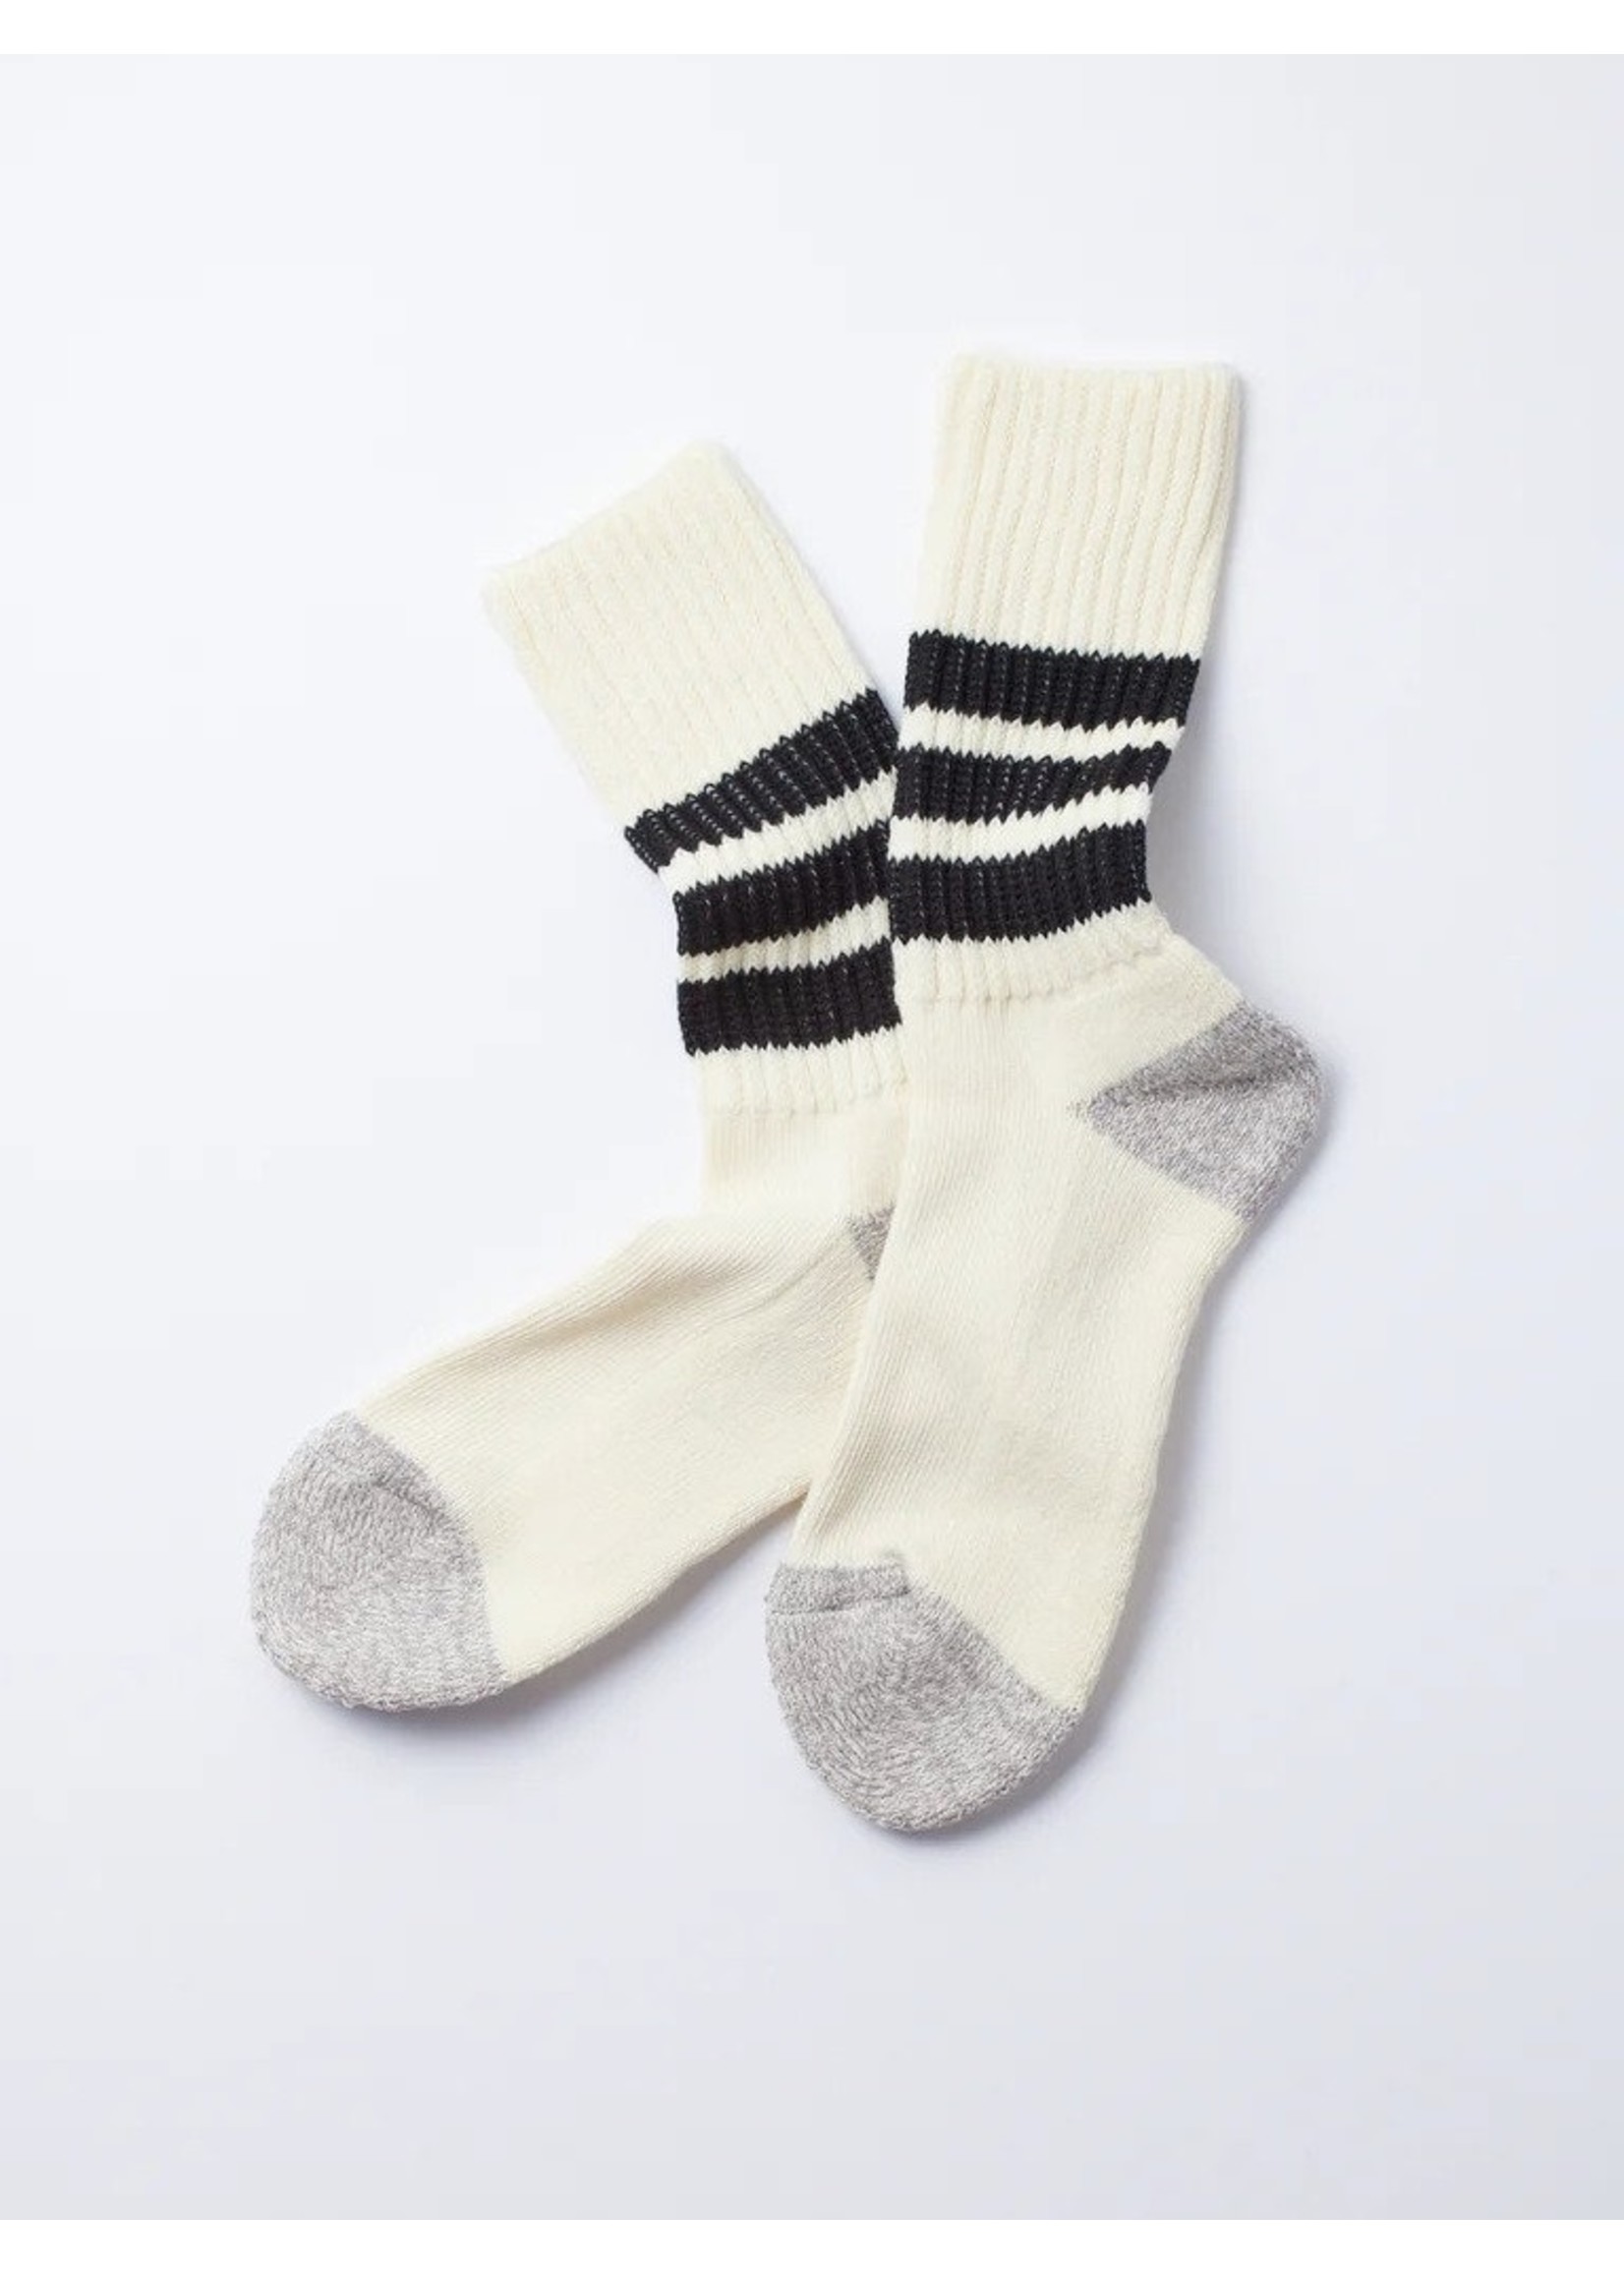 Rototo Ultimate comfort socks "Coarse Ribbed Old School" by ROTOTO